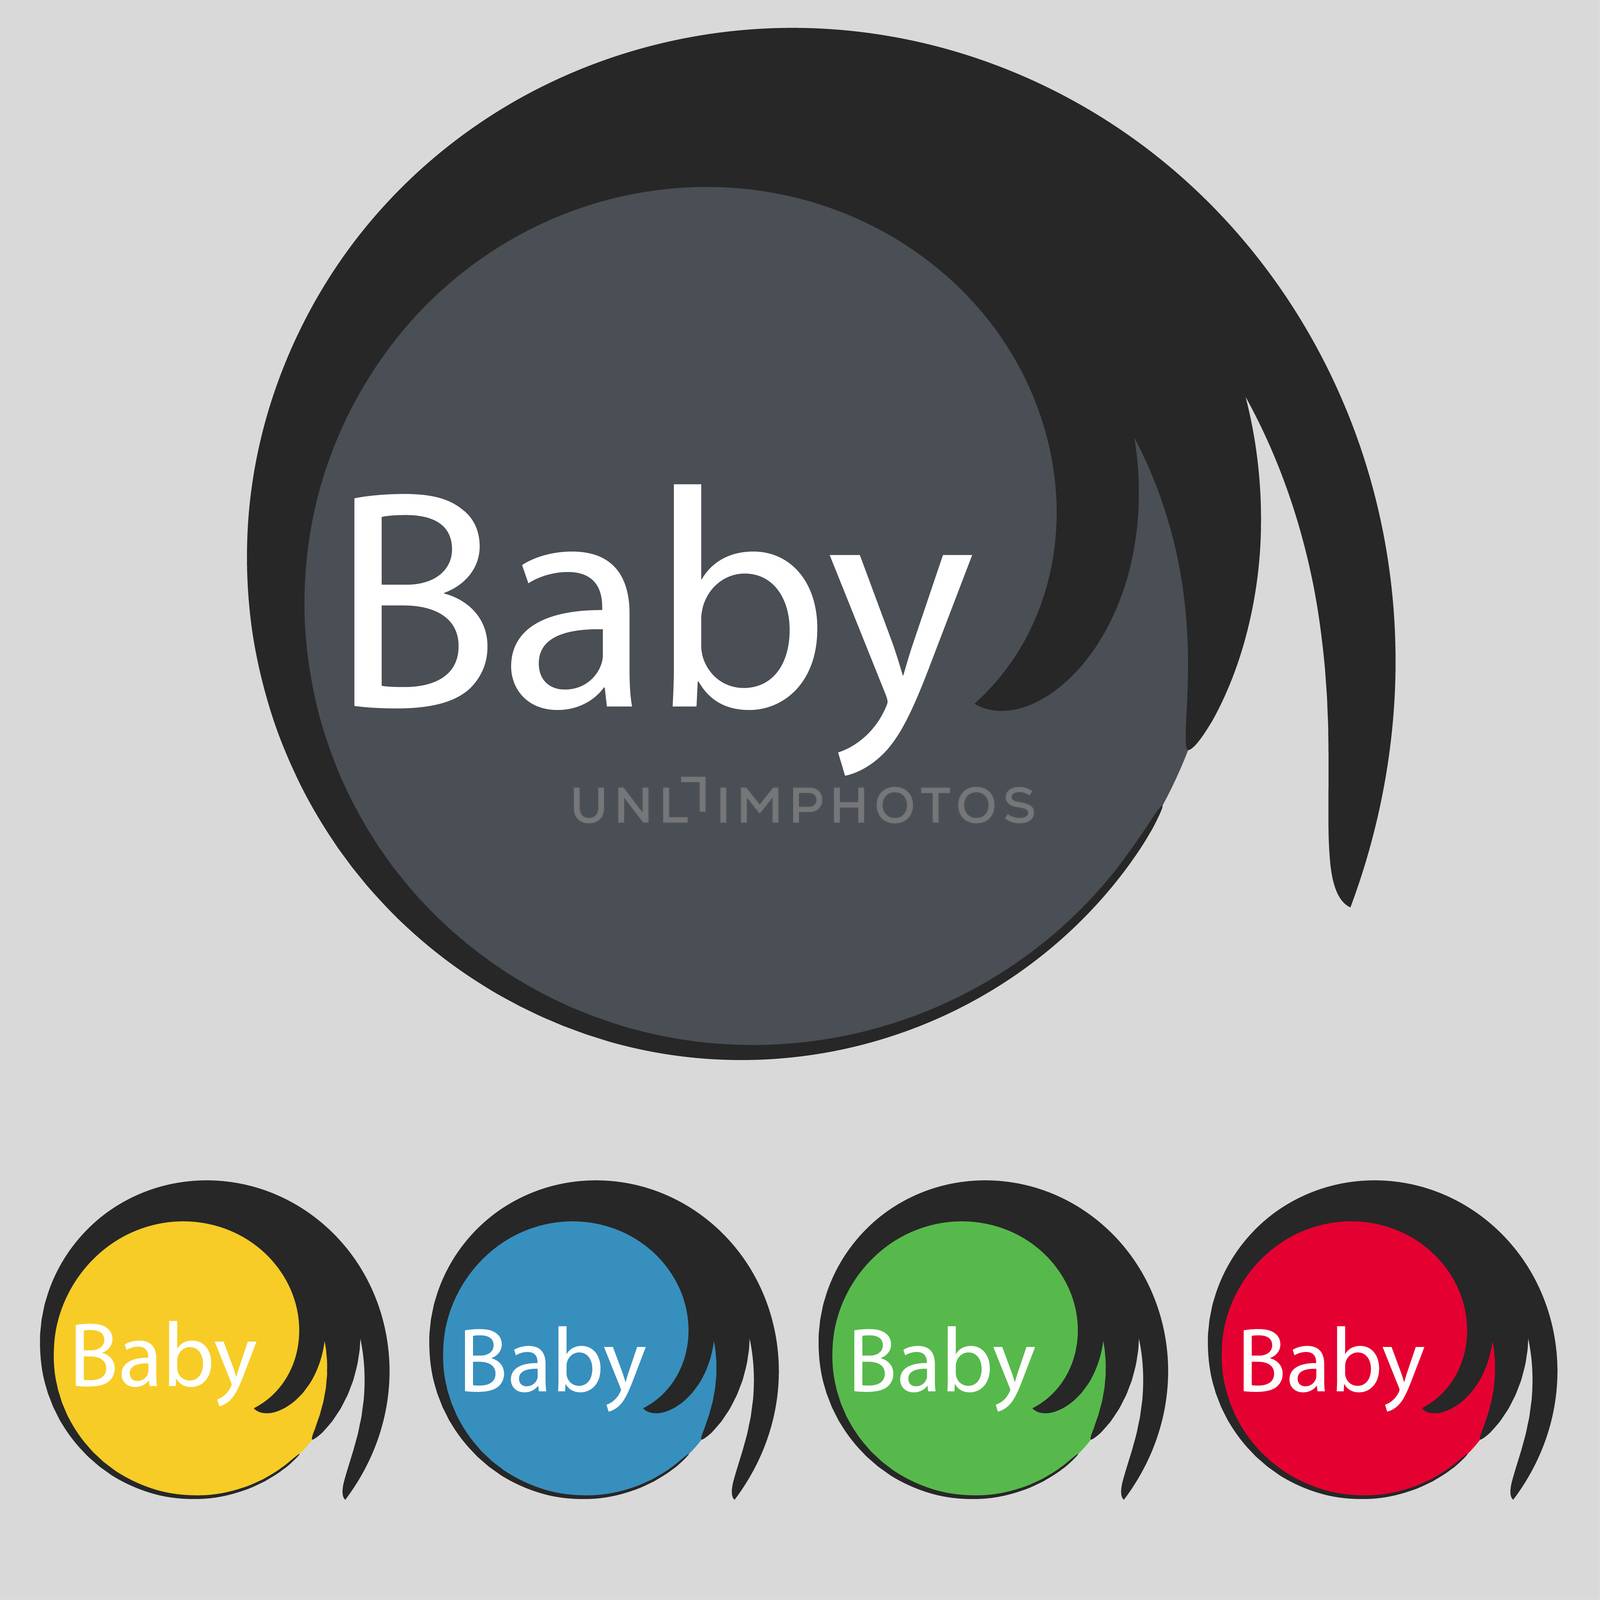 Baby on board sign icon. Infant in car caution symbol. Baby pacifier nipple. Set of colored buttons. illustration